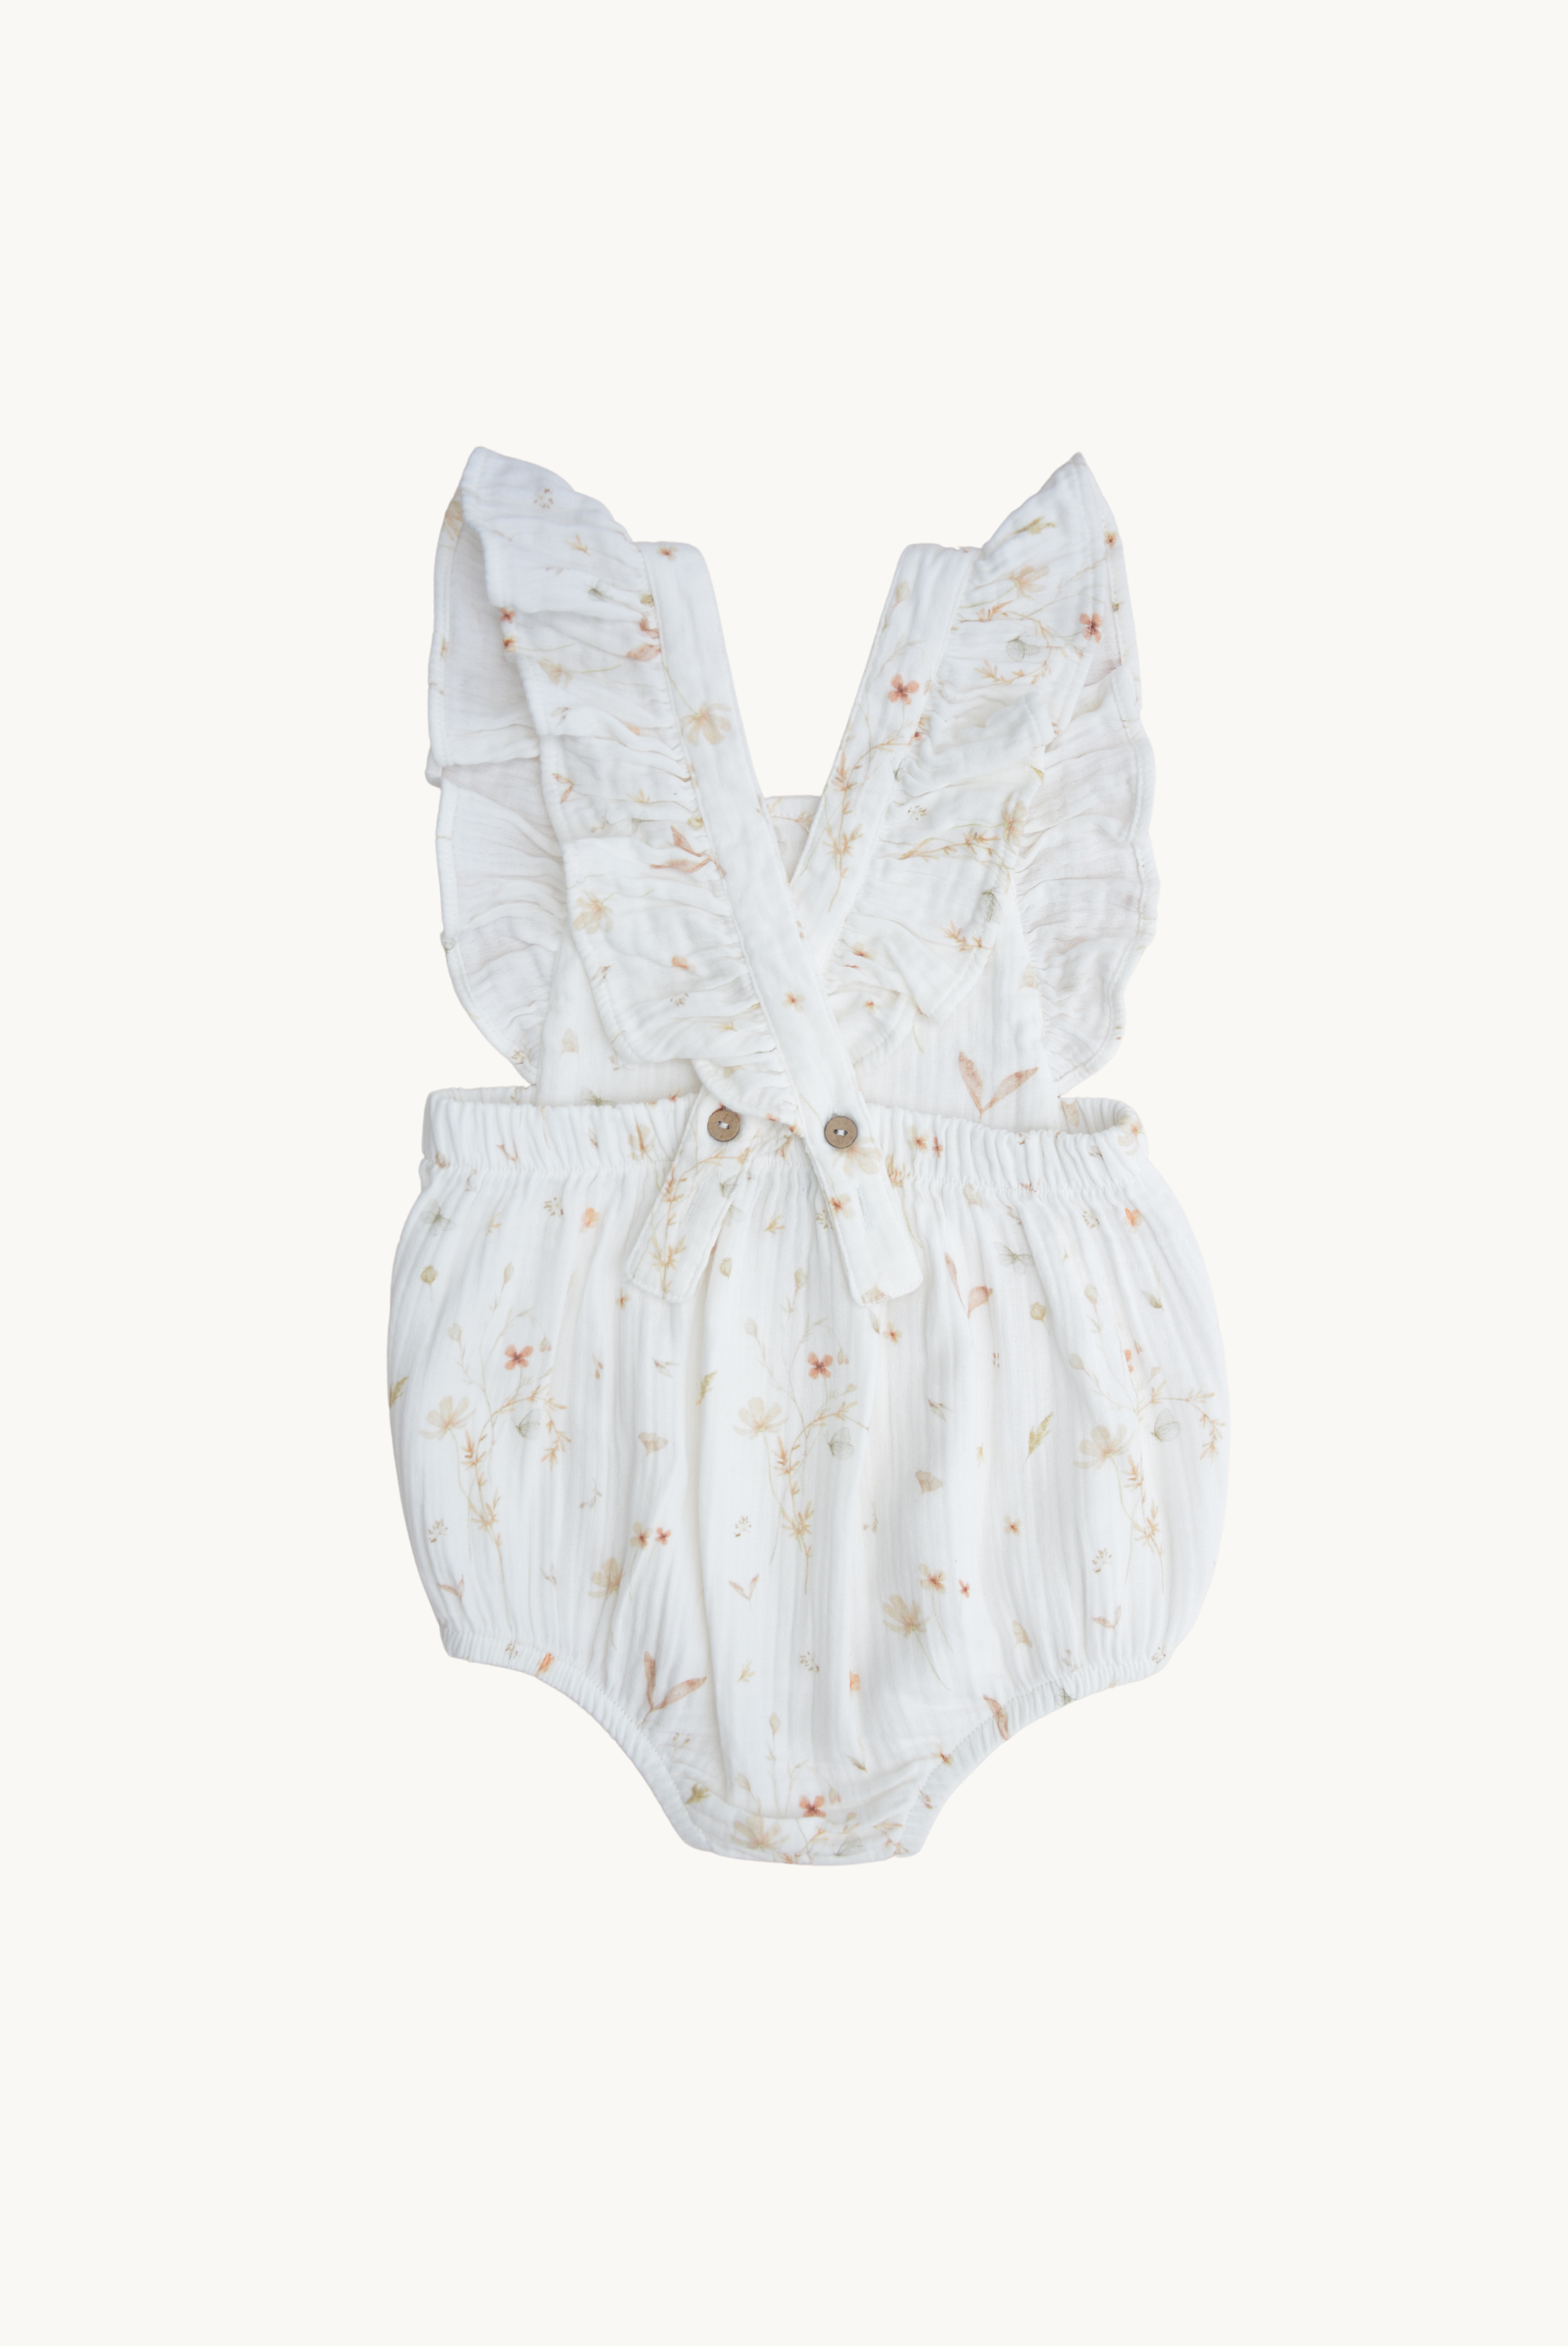 LUNA Romper - White with floral print * Baby muslin romper made from 100% cotton